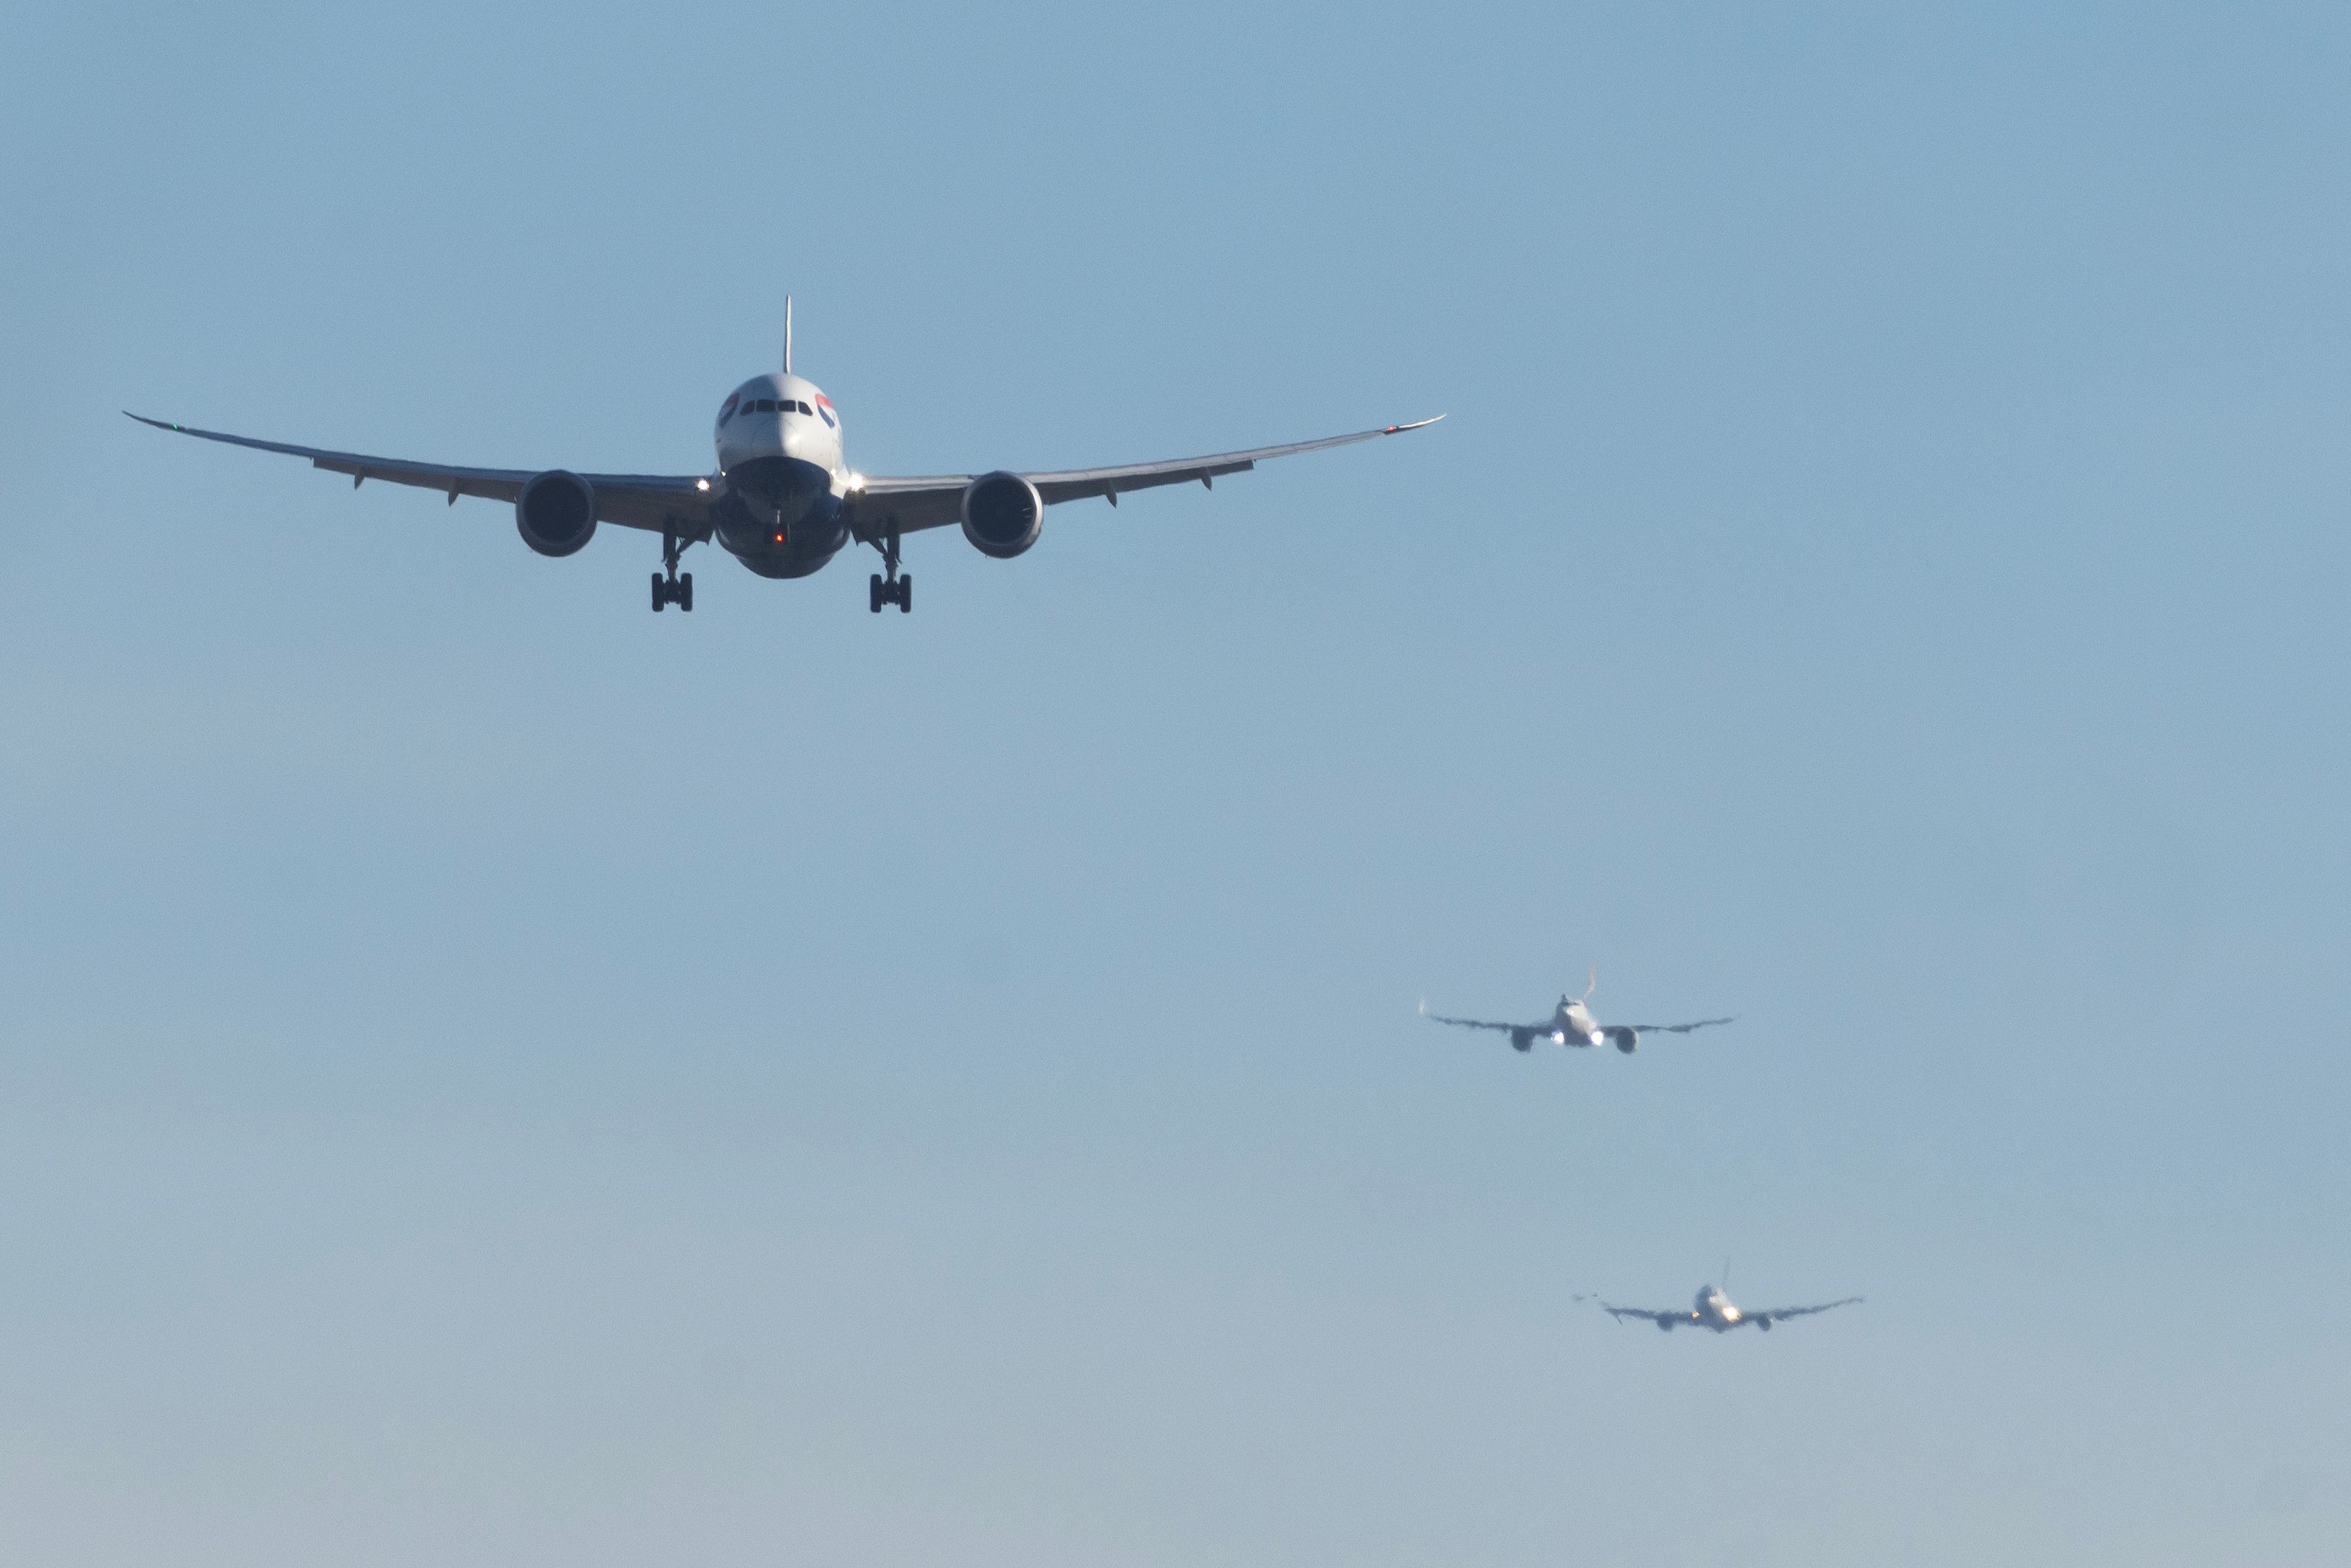 planes coming in for landing at Heathrow